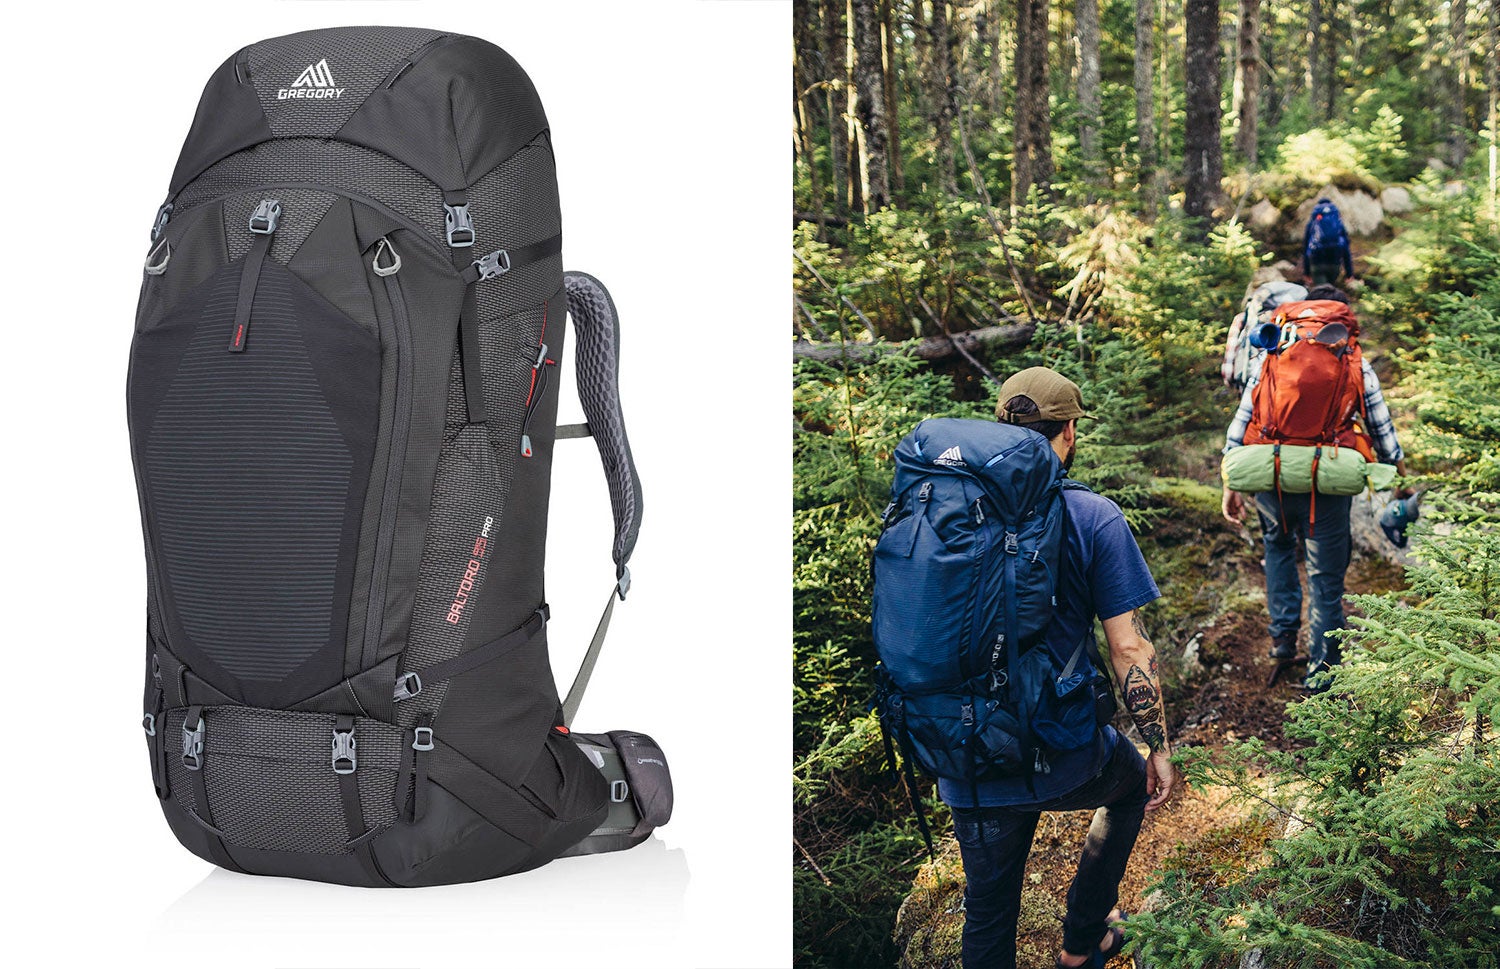 black gregory pack next to image of two hikers on a forest trail